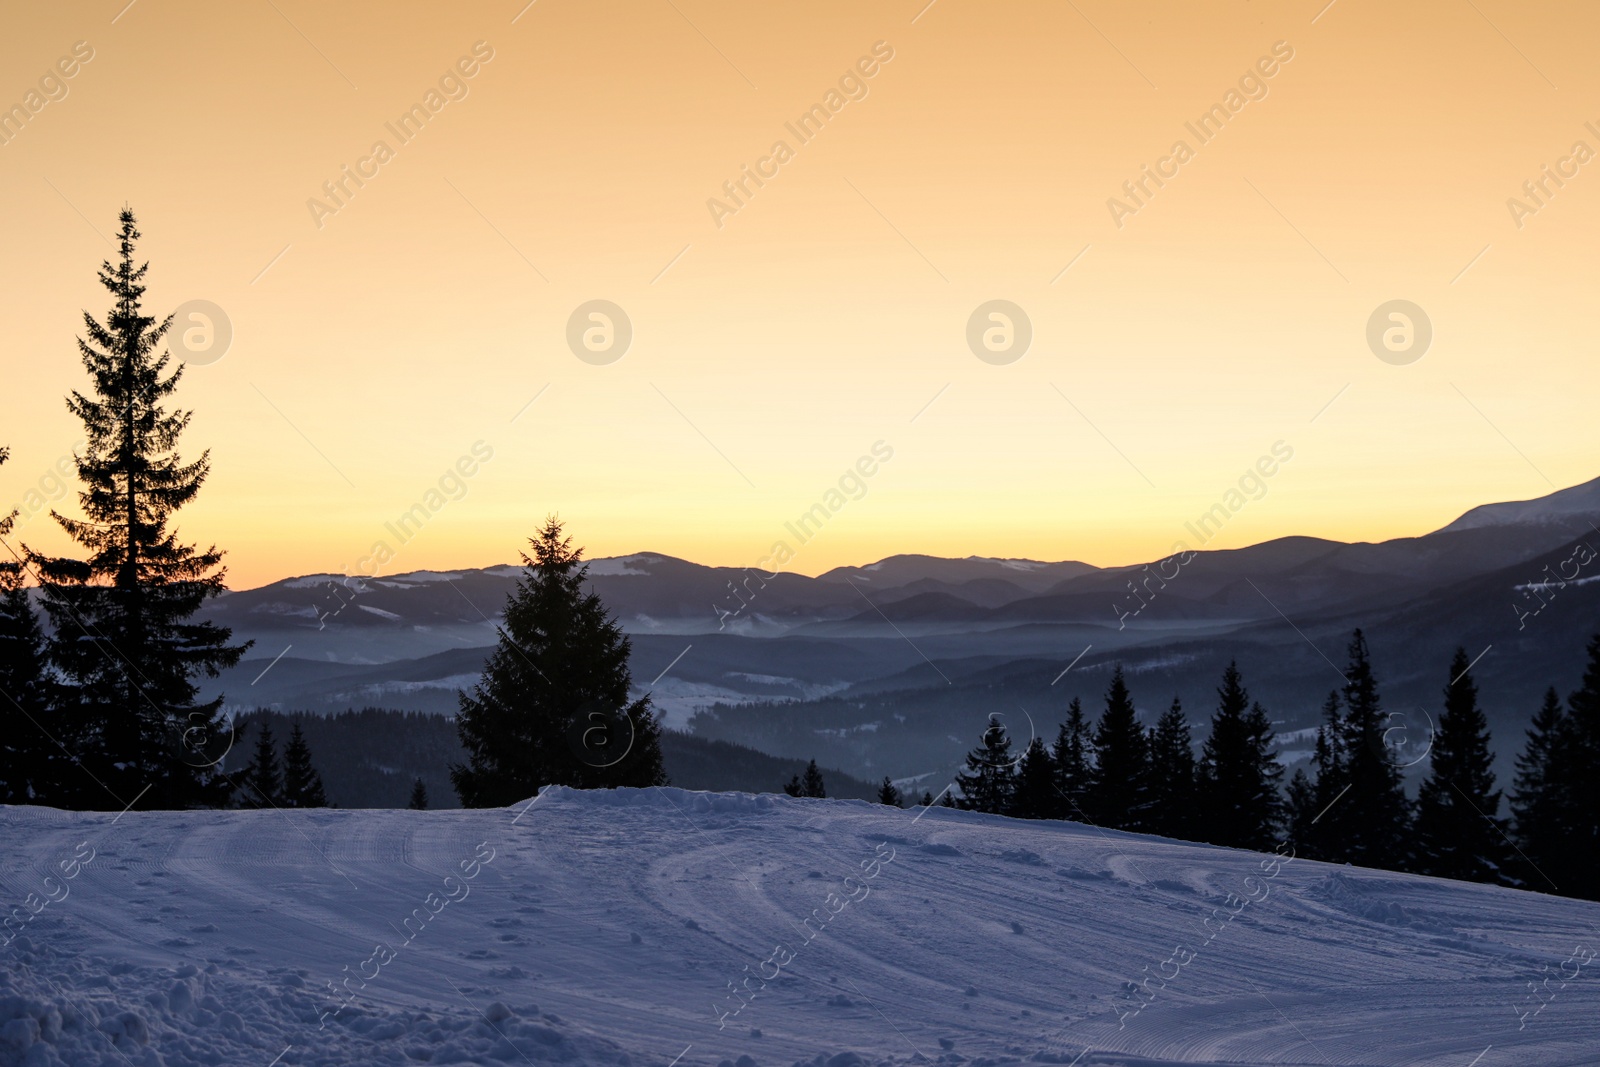 Photo of Picturesque mountain landscape with snowy forest in winter